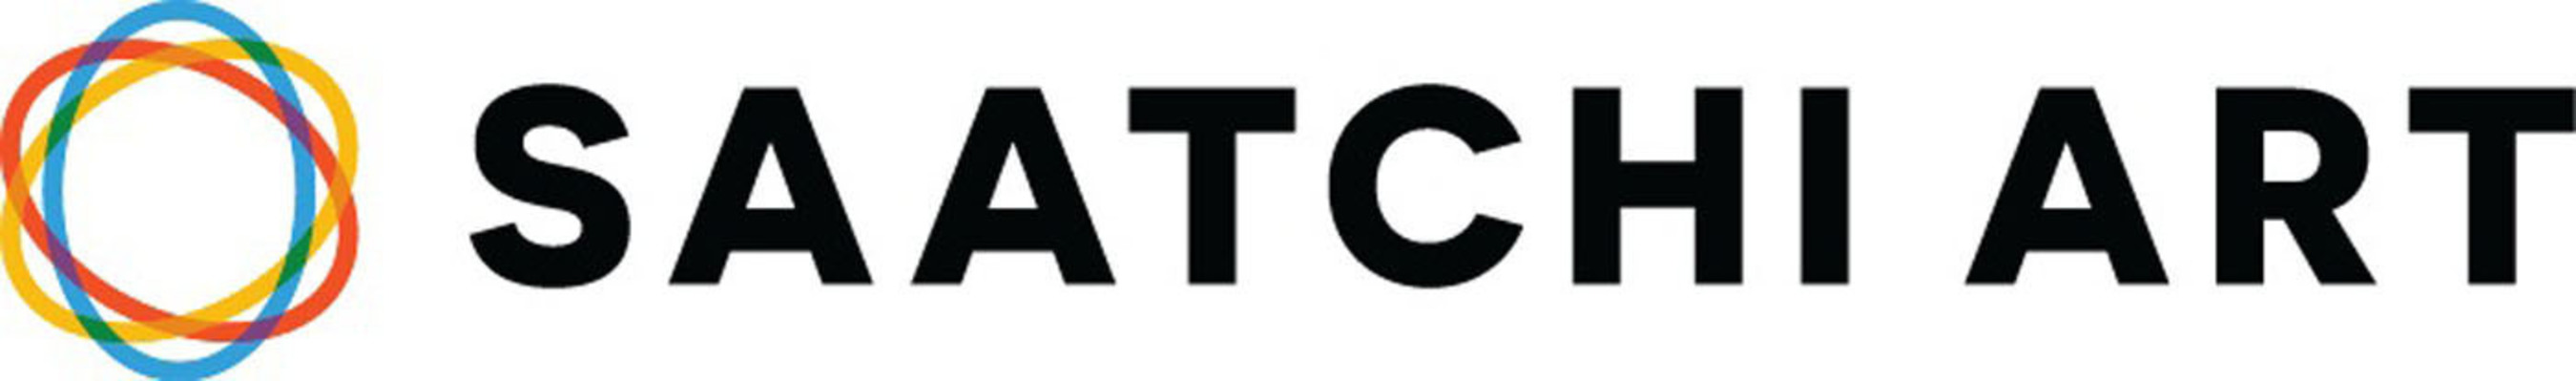 Saatchi Art is the world's leading online art gallery, connecting people with art and artists they love. (PRNewsFoto/Saatchi Art) (PRNewsFoto/SAATCHI ART)